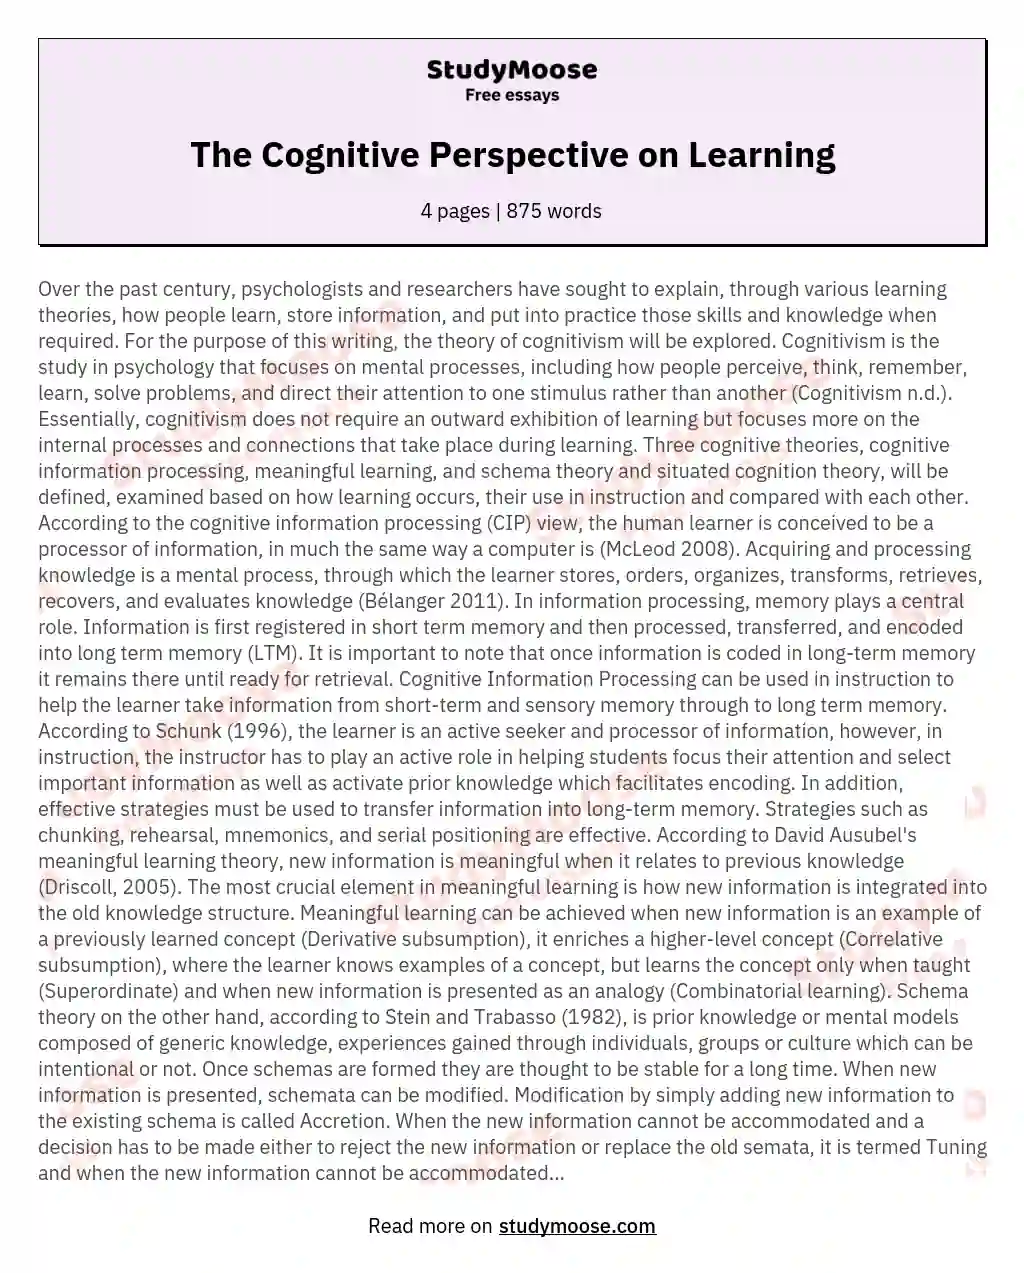 The Cognitive Perspective on Learning essay